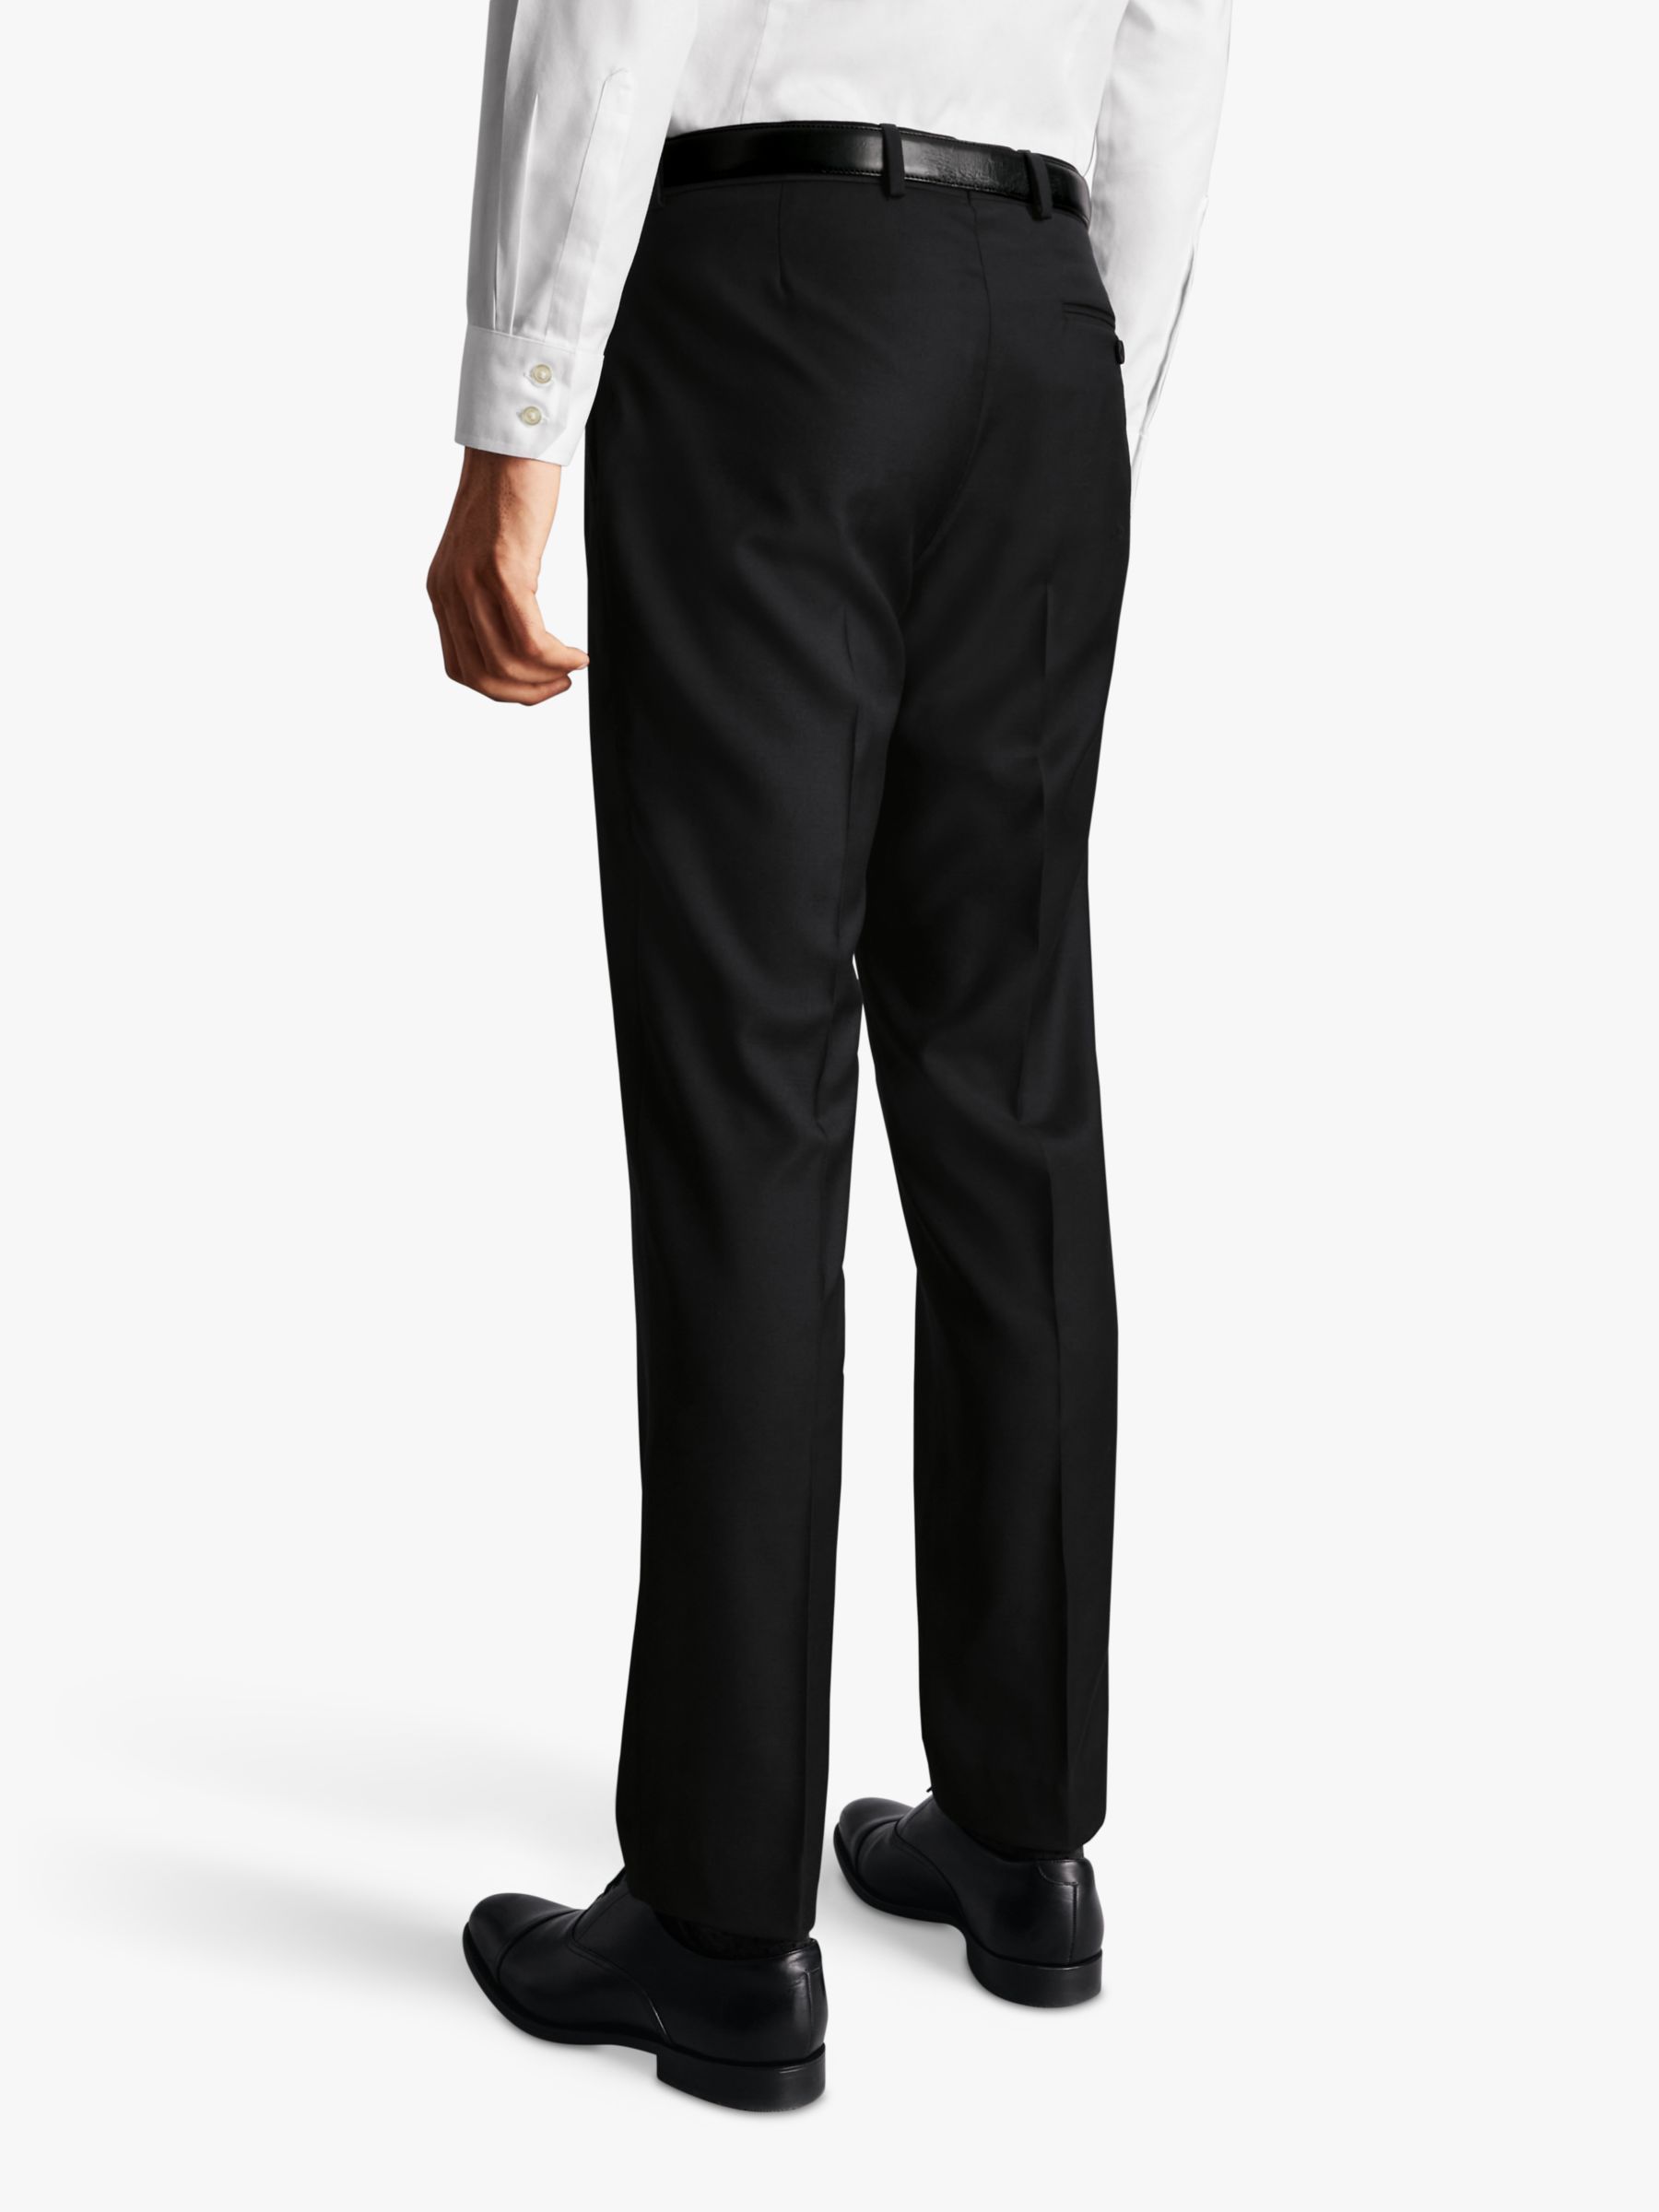 Charles Tyrwhitt Natural Stretch Twill Suit Trousers, Black at John ...